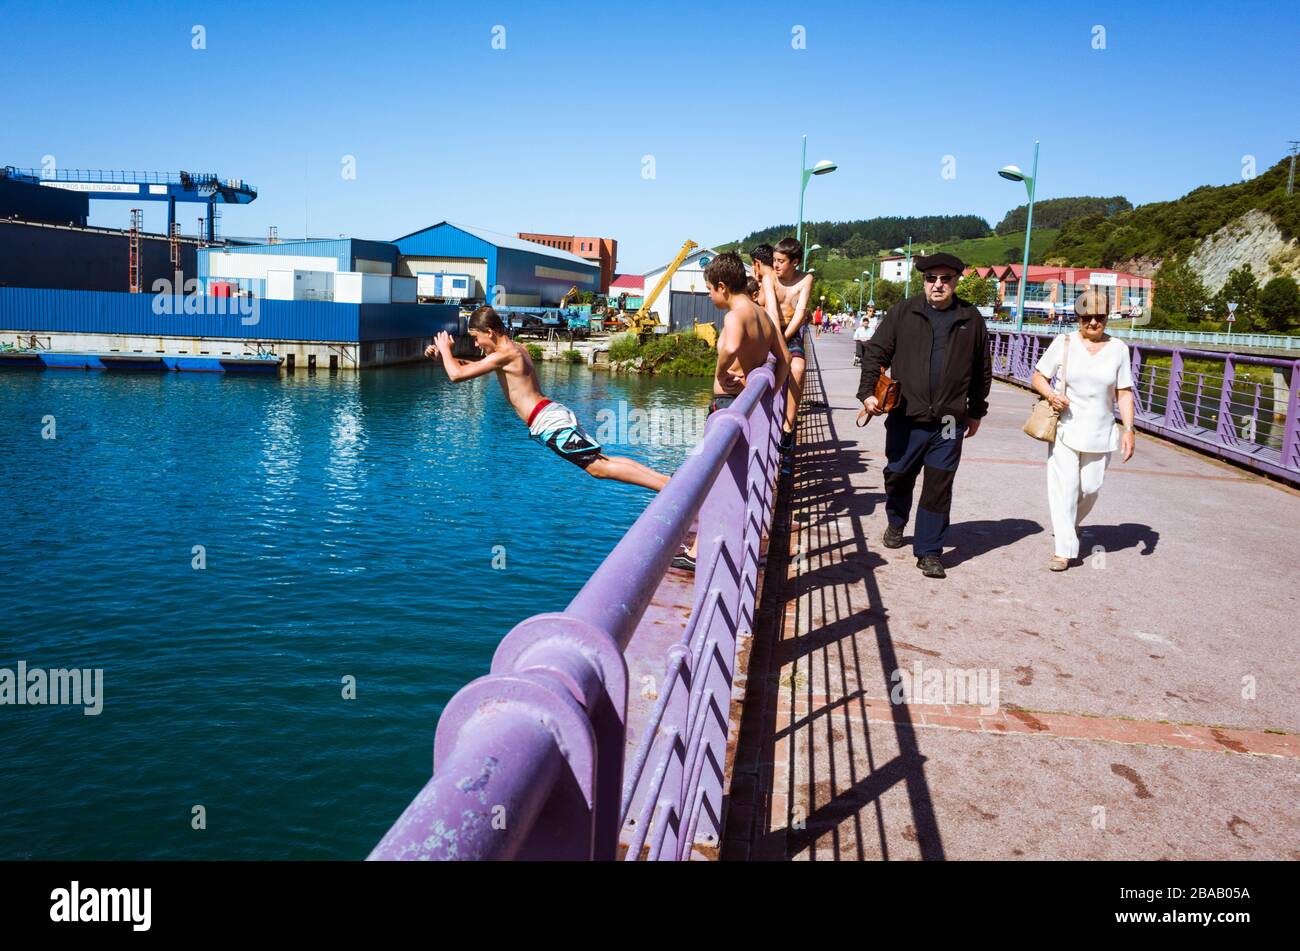 Zumaia, Gipuzkoa, Basque Country, Spain - July 15th, 2019 : Teenagers jump to the water from a bridge over ria del Urola estuary. Stock Photo